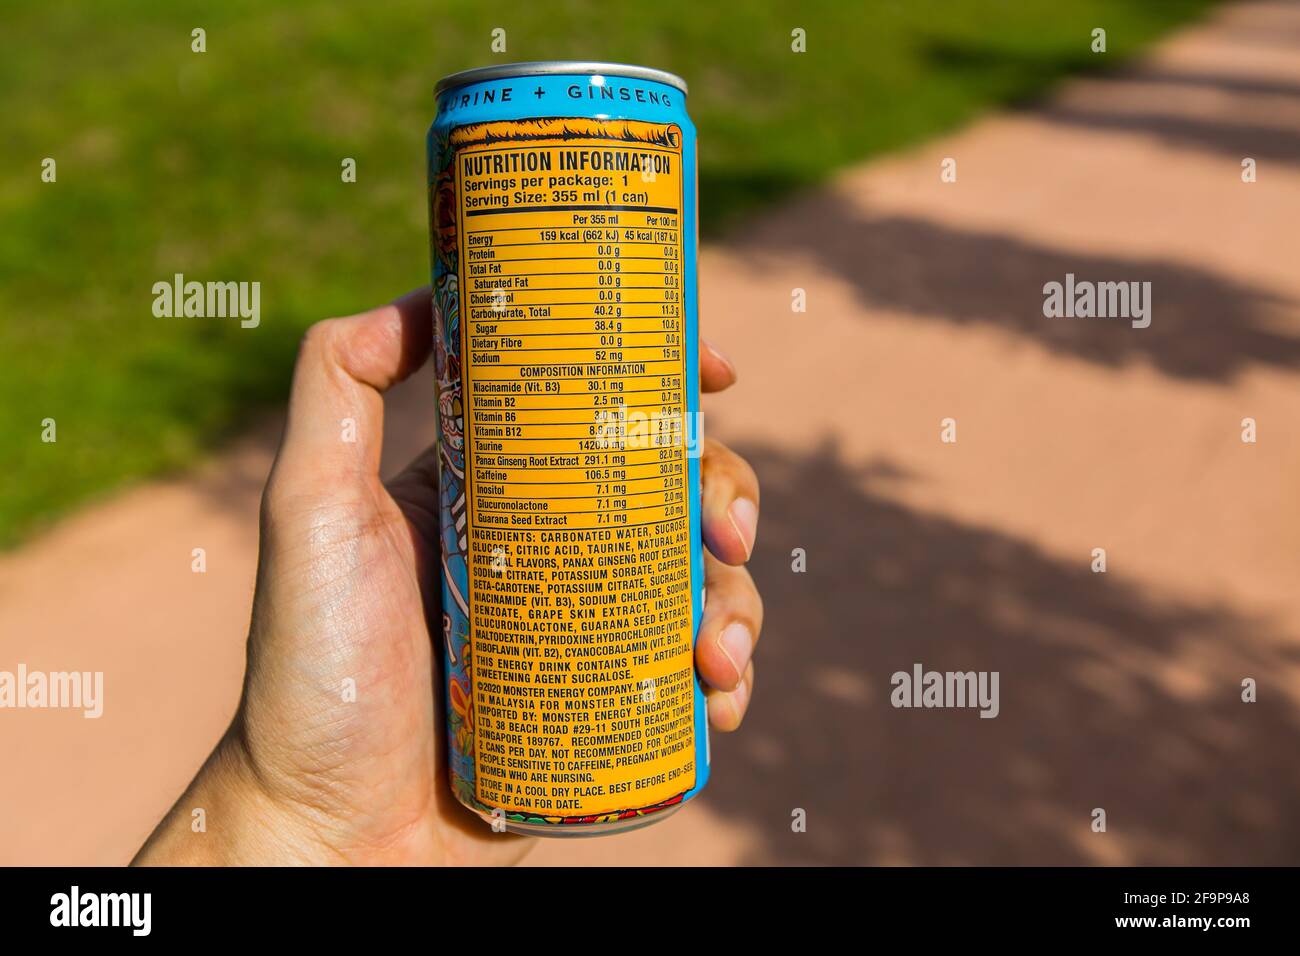 A hand holding a Monster Energy can drink showing nutrition information content. Stock Photo